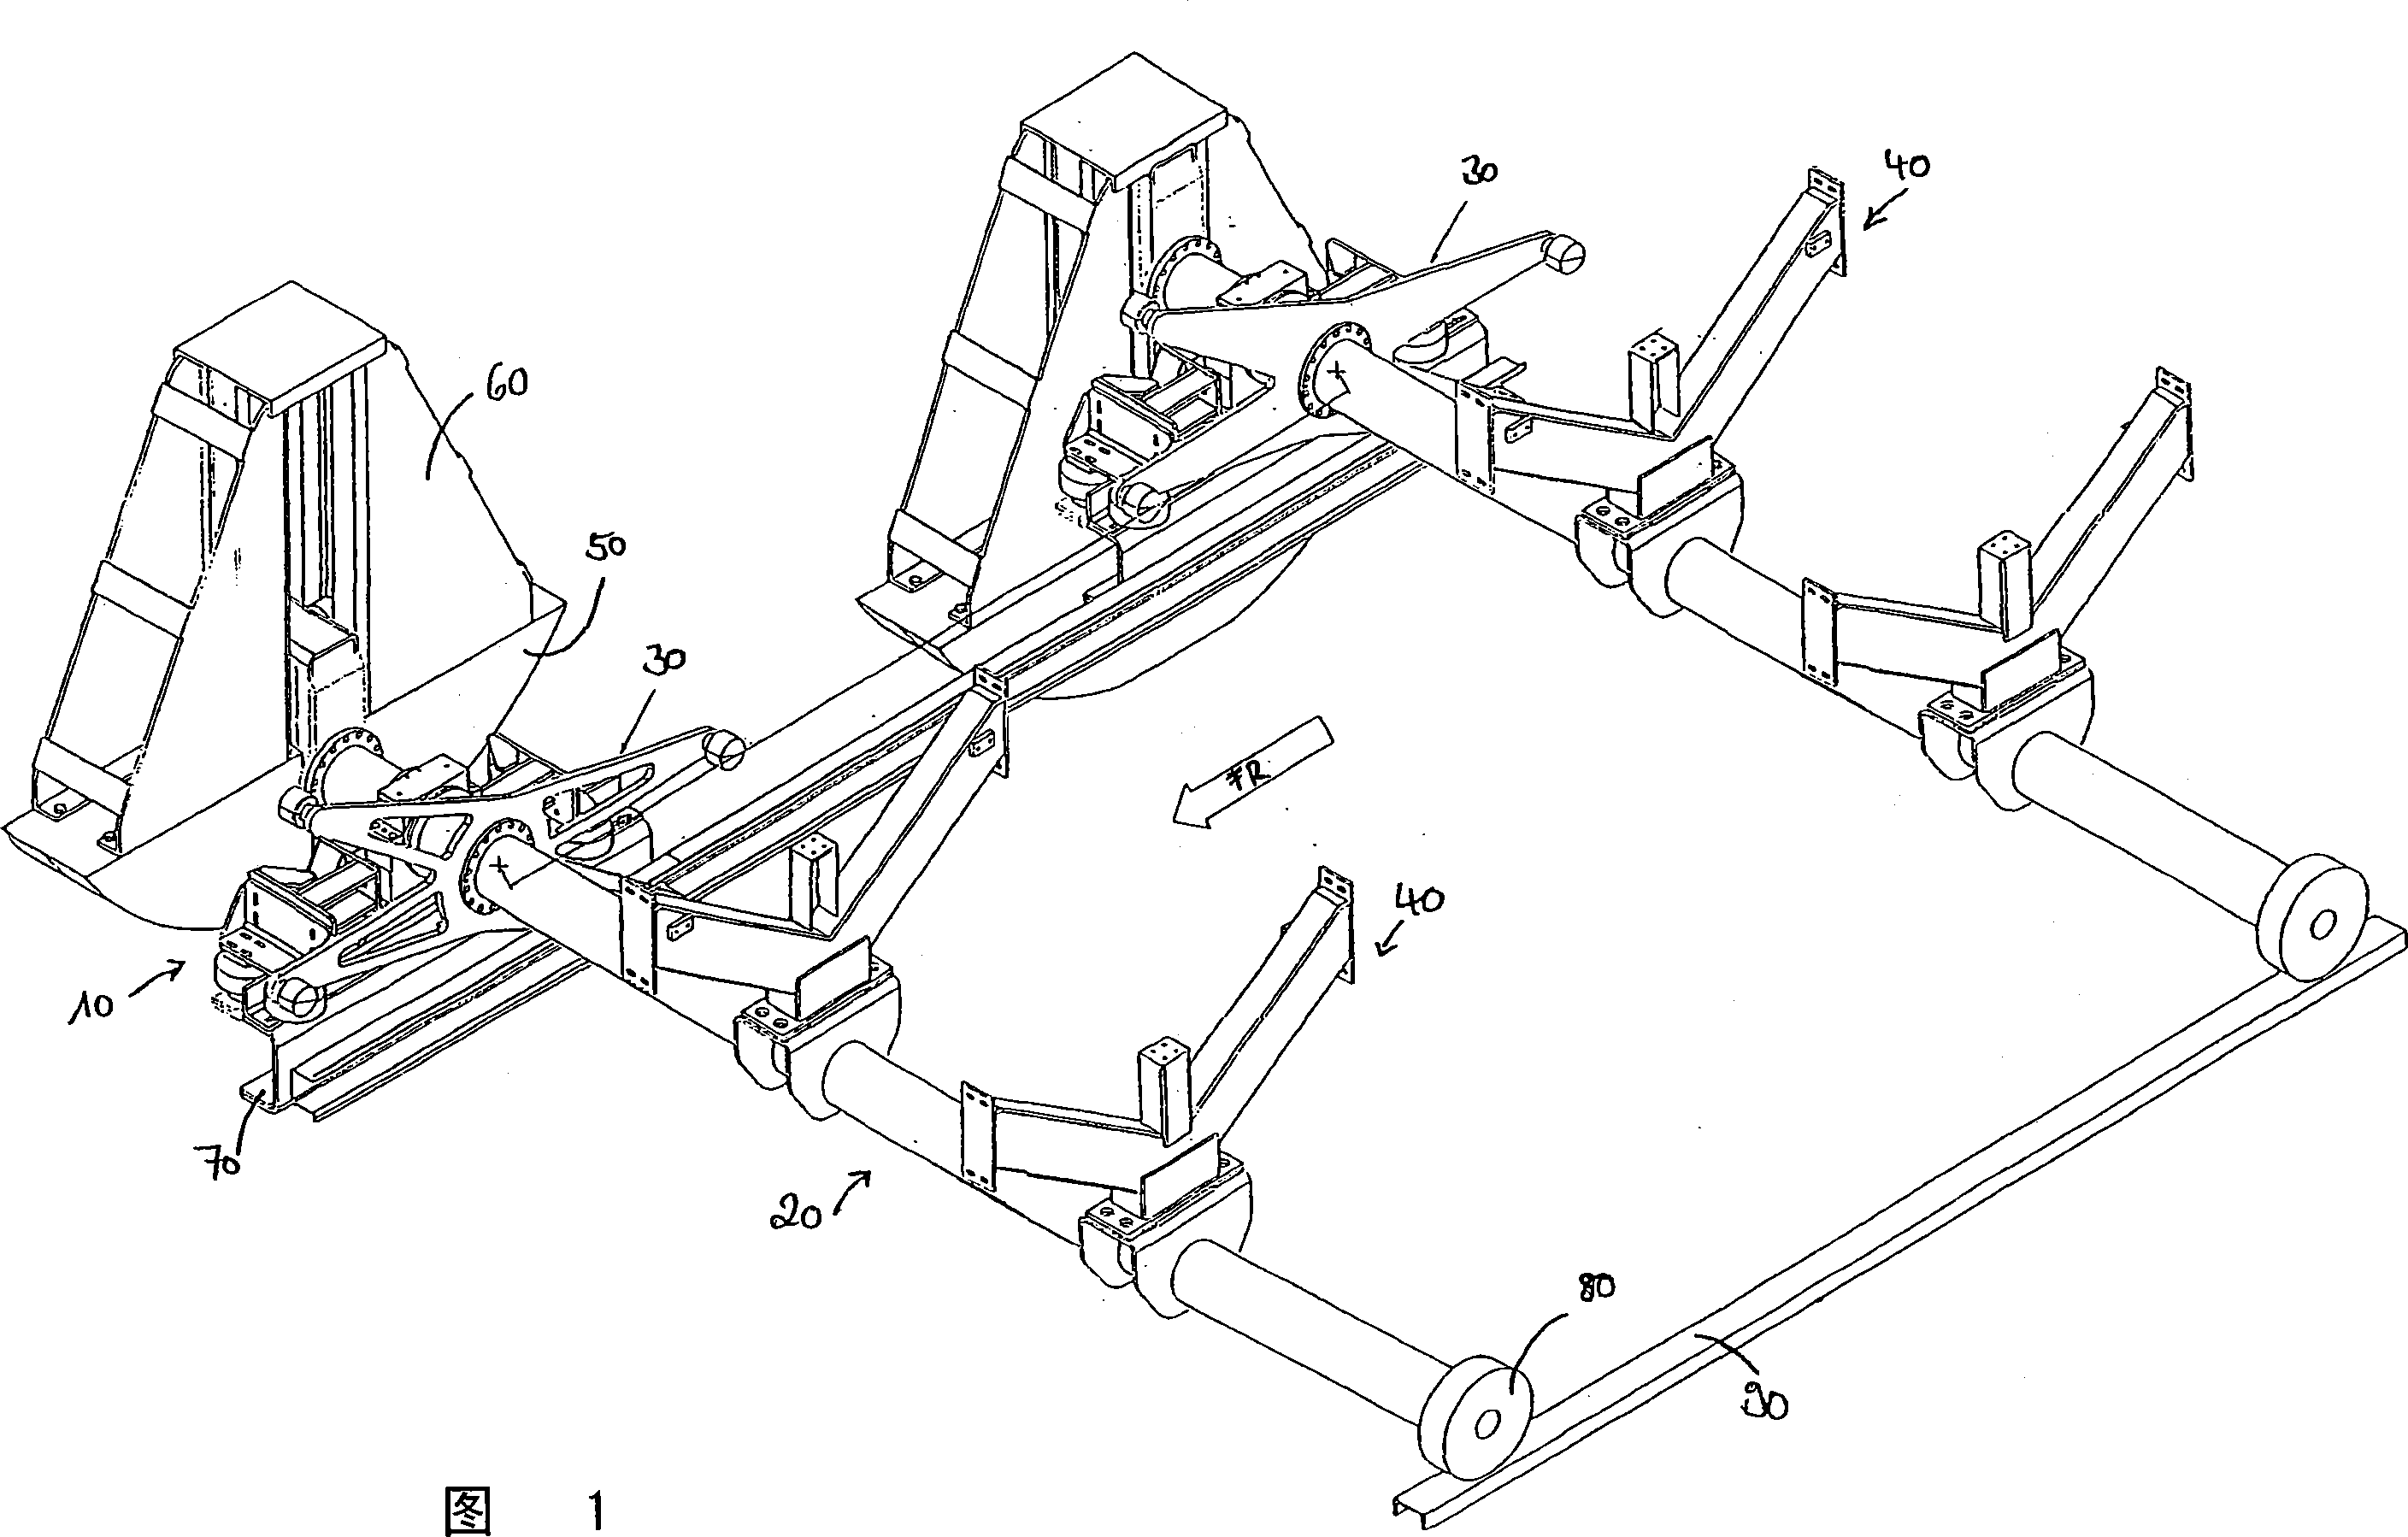 Unit and method for conveying workpieces along a processing run